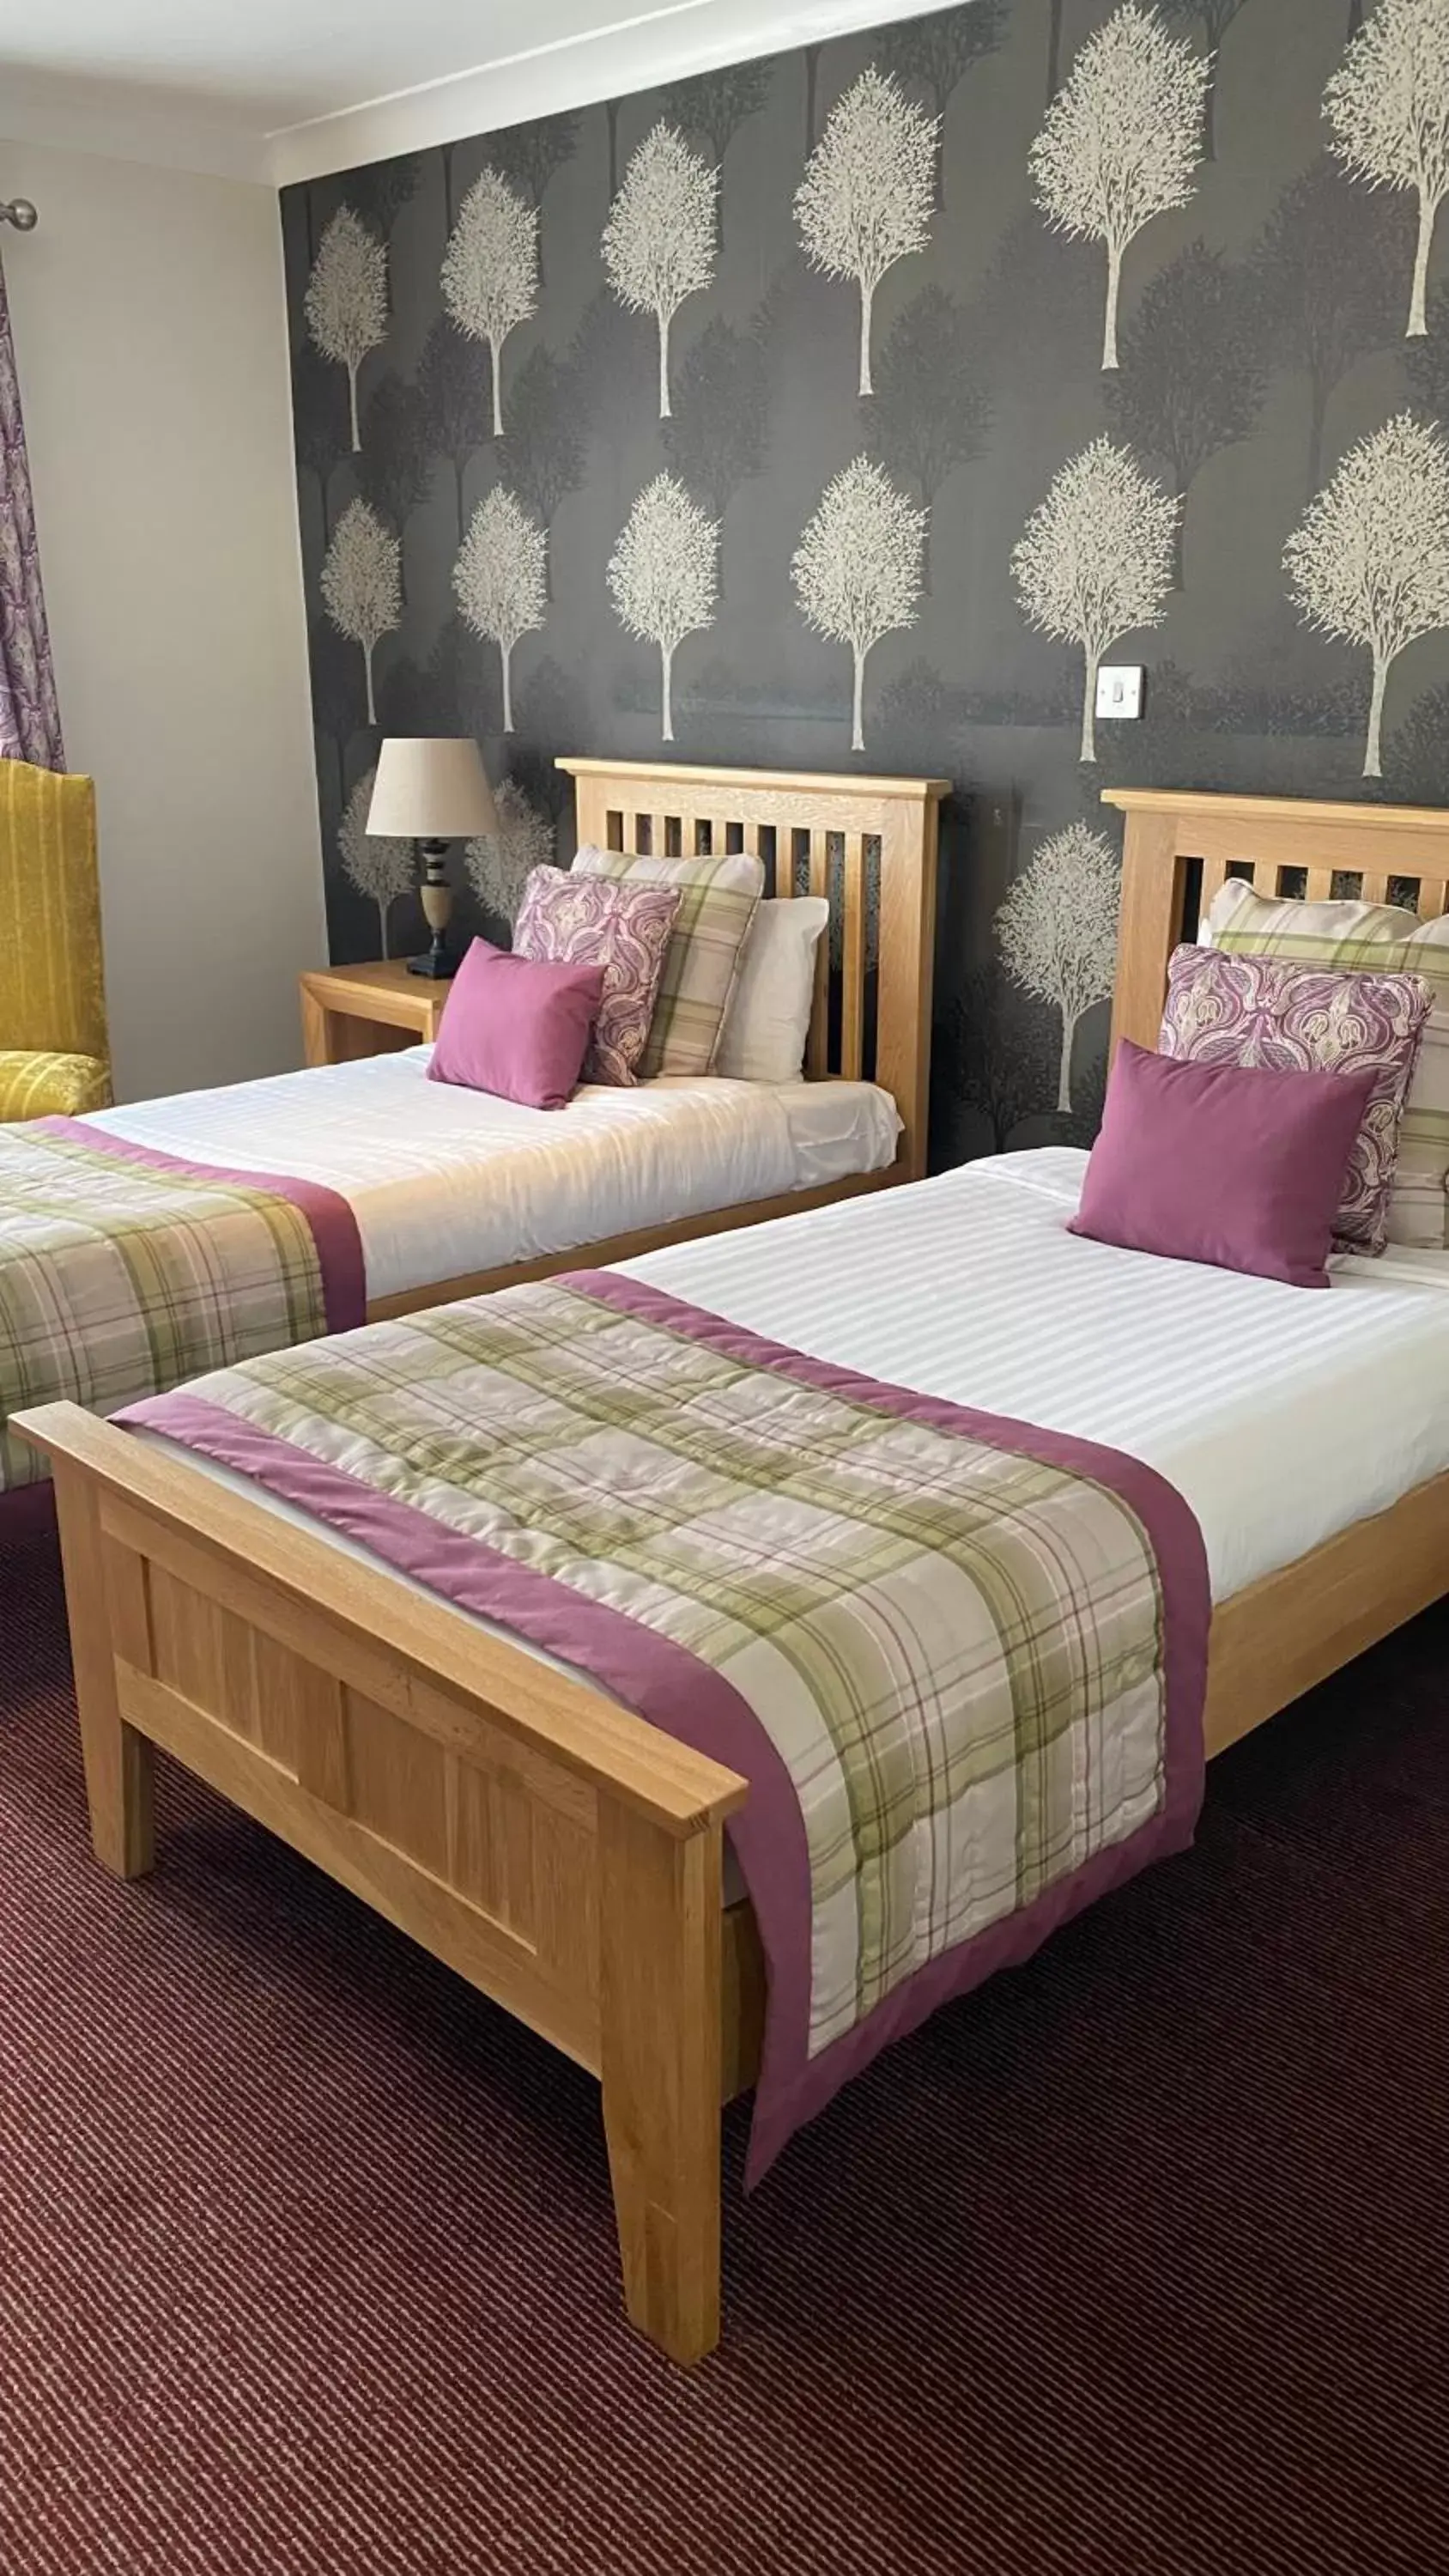 Bed in Stone House Hotel ‘A Bespoke Hotel’